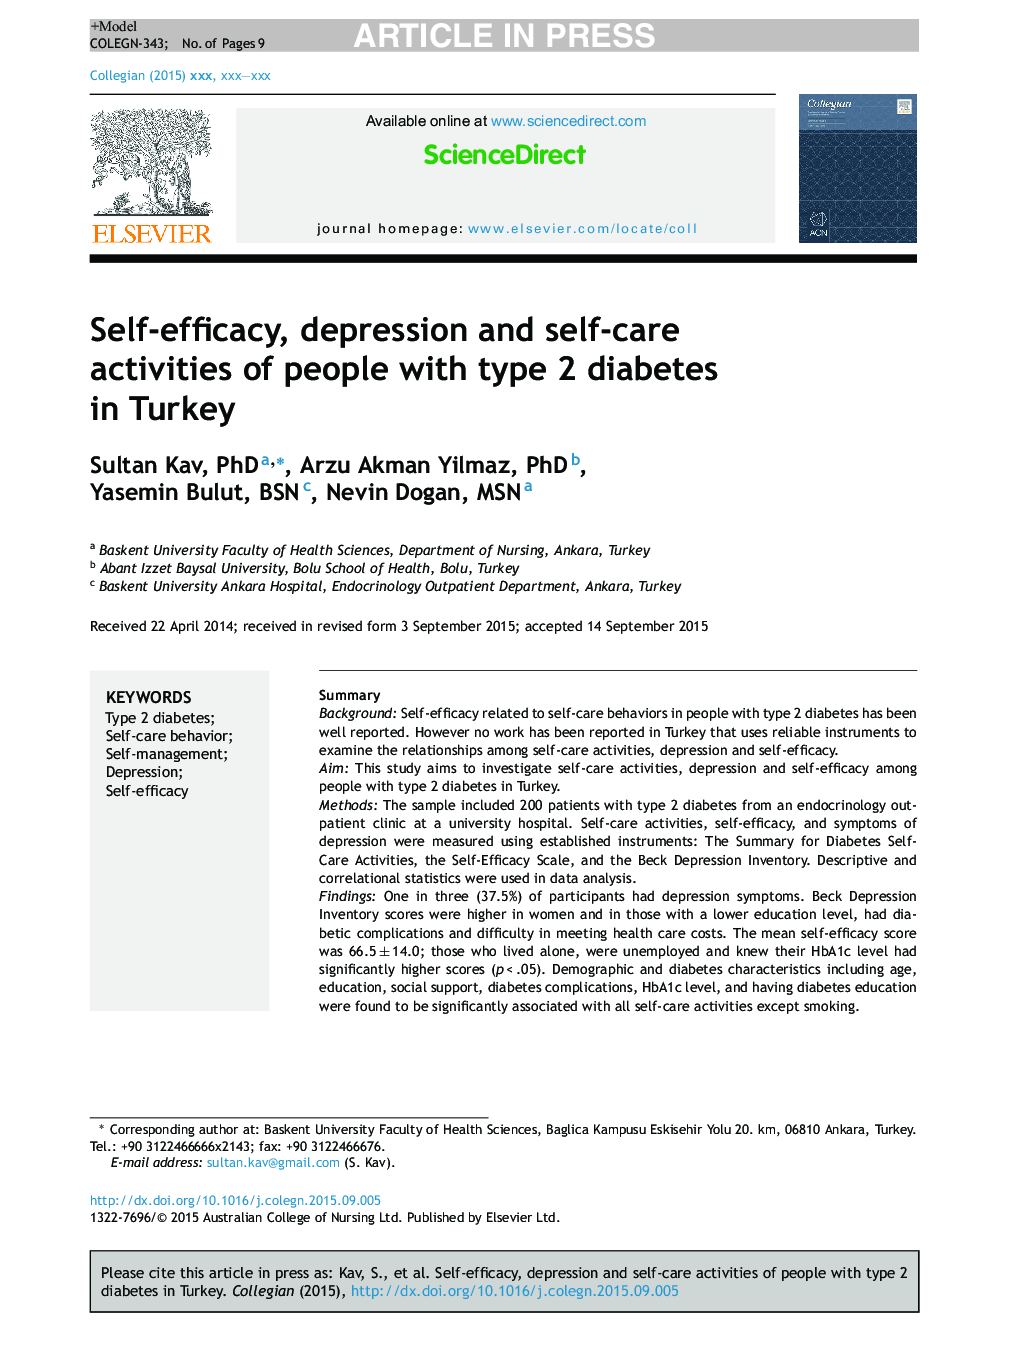 Self-efficacy, depression and self-care activities of people with type 2 diabetes in Turkey